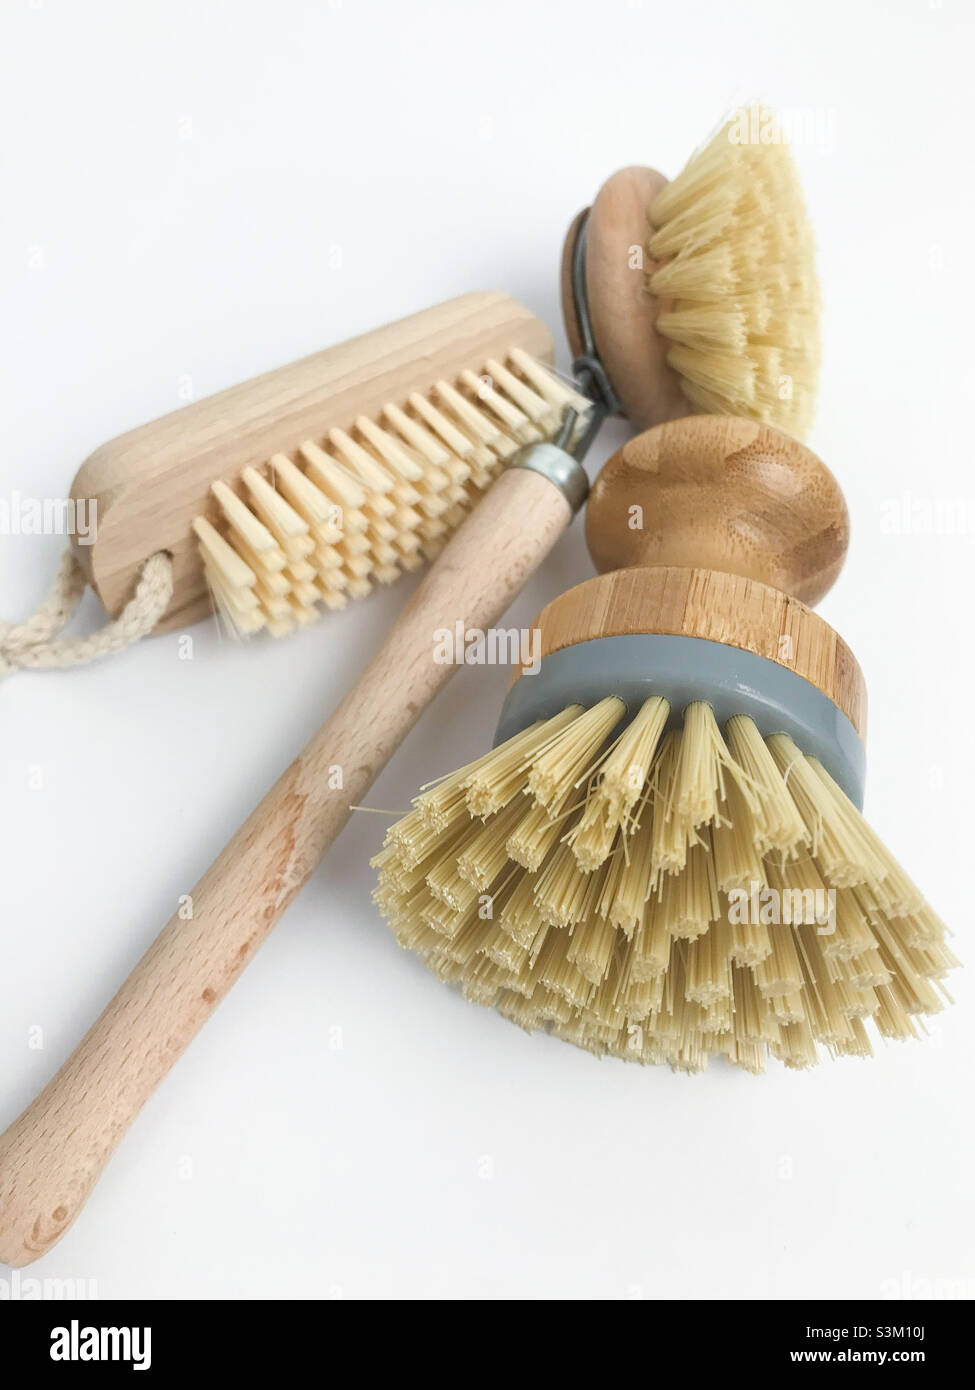 Zero Waste Cleaning brush in The kitchen Stock Photo